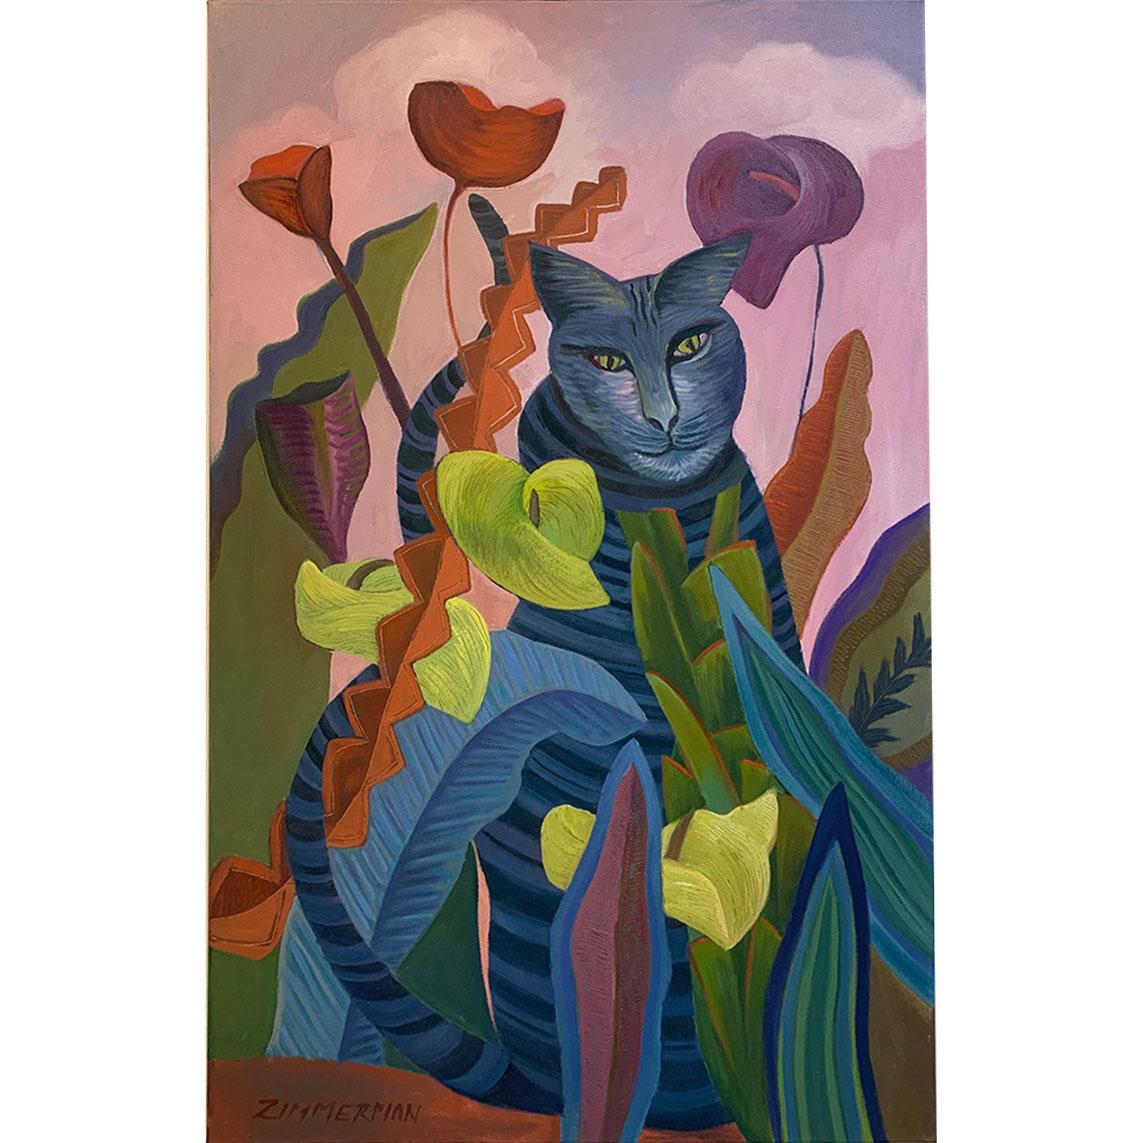 Jungle with creative license of tangled growth and bright flowers and peaking out from the foliage is a strange hybrid of jungle cat. Playful and somewhat surreal.

Jungle Creature - Animal Paintings - Oil on Canvas By Marc Zimmerman

This